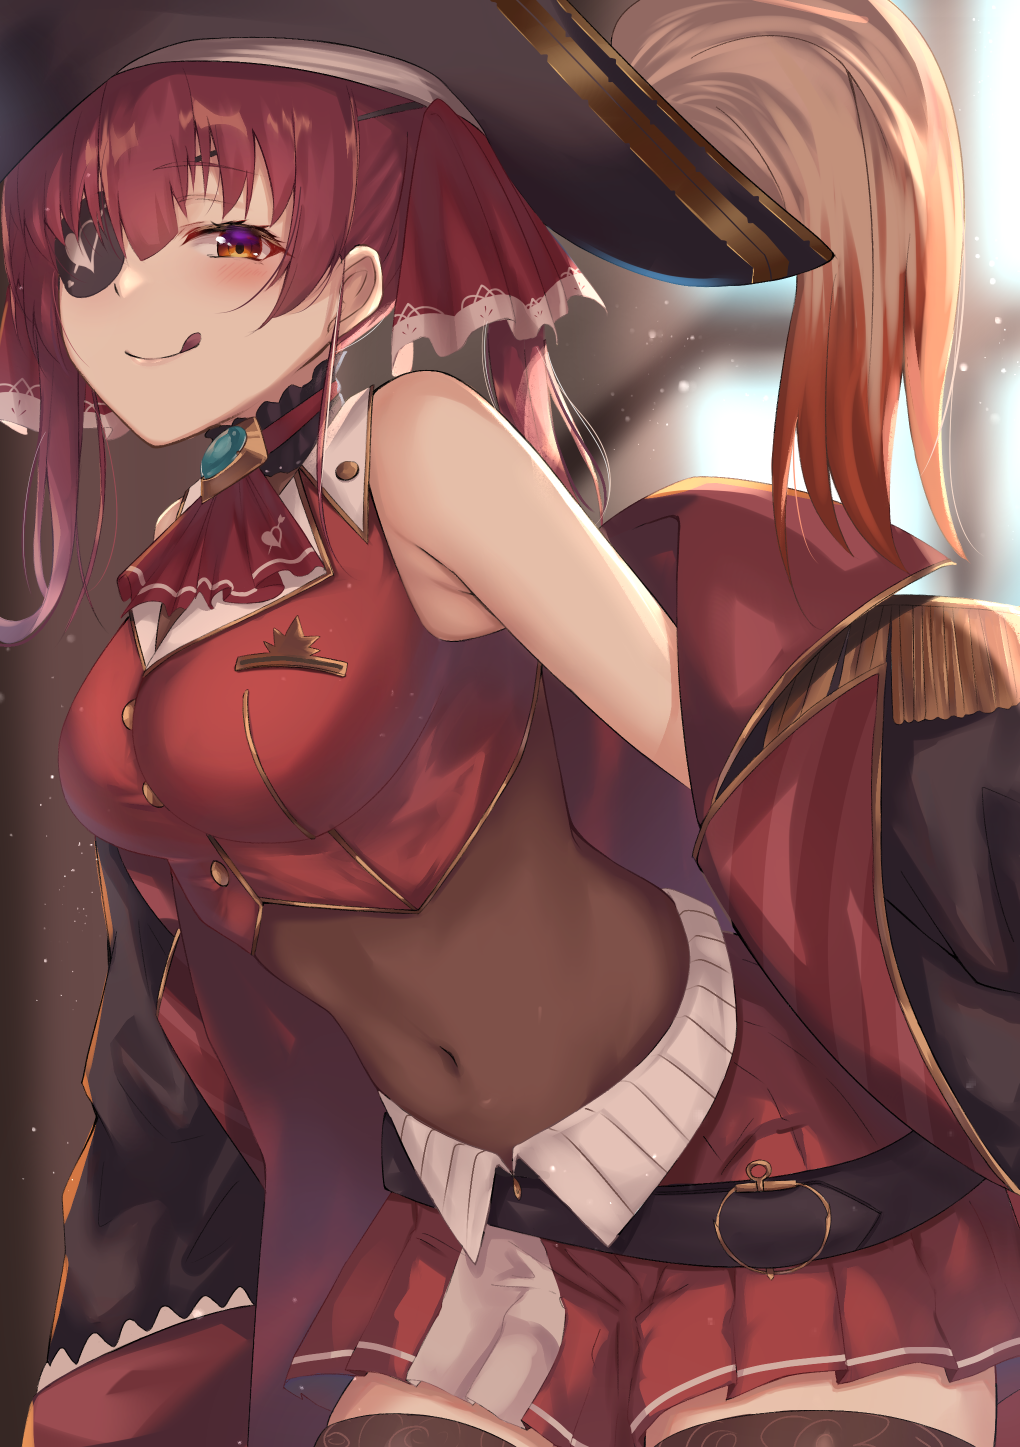 Anime Girls Hololive Houshou Marine Yami Kyon Oov Smiling Tongue Out Brown Eyes Eyepatches Redhead P 1020x1447